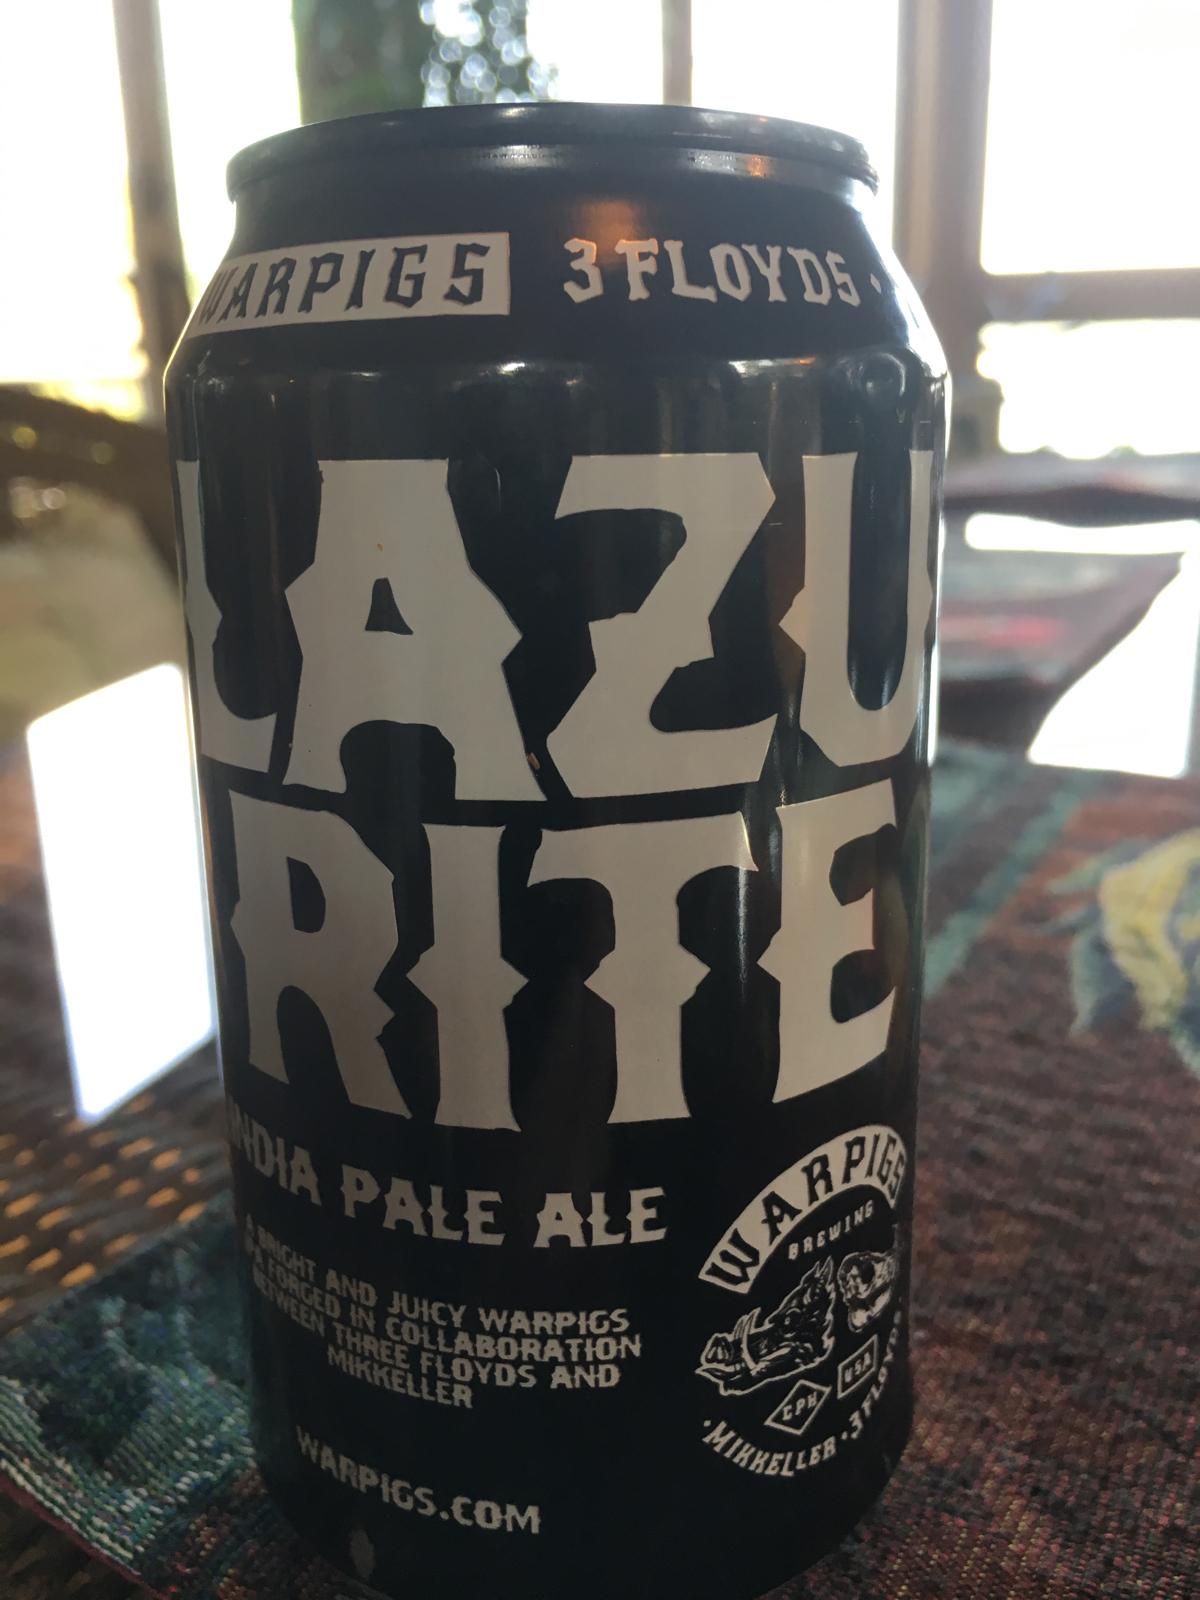 Lazurite (Collaboration with 3 Floyds)